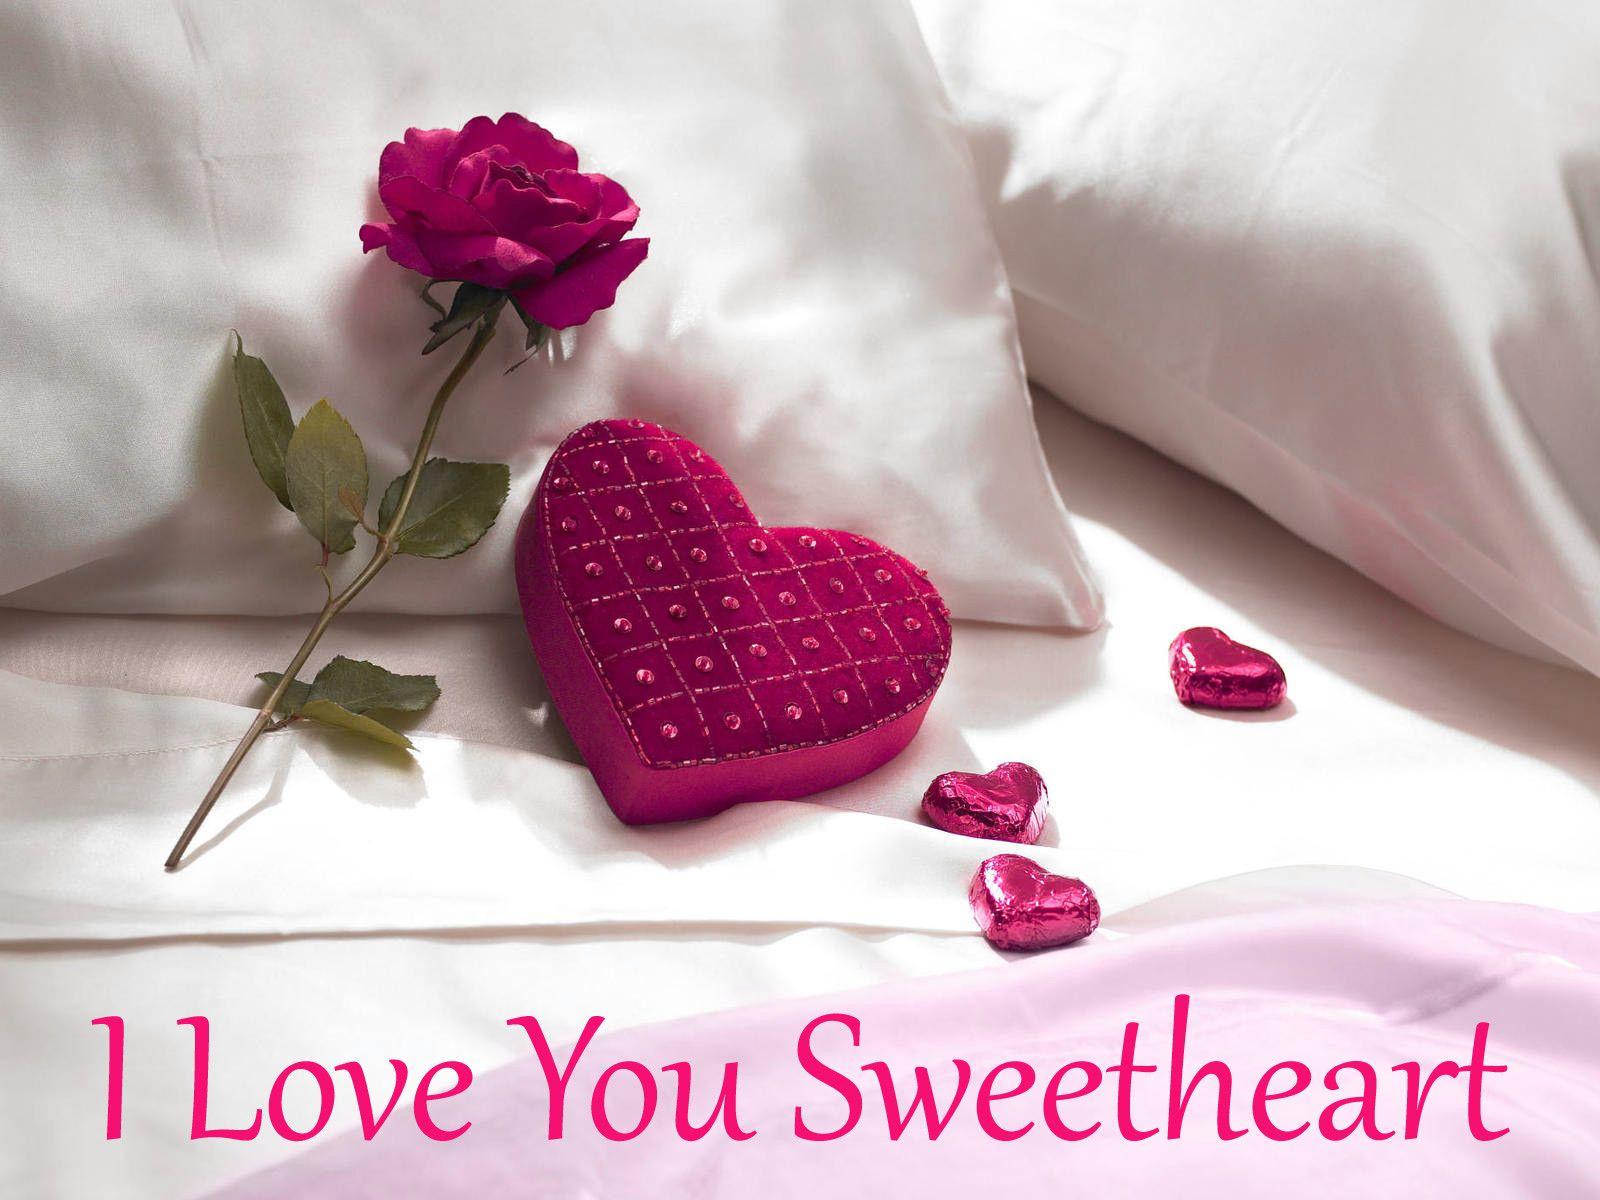 Cute I Love U Wallpaper For Mobile 10777 Image Picture Free Lovely